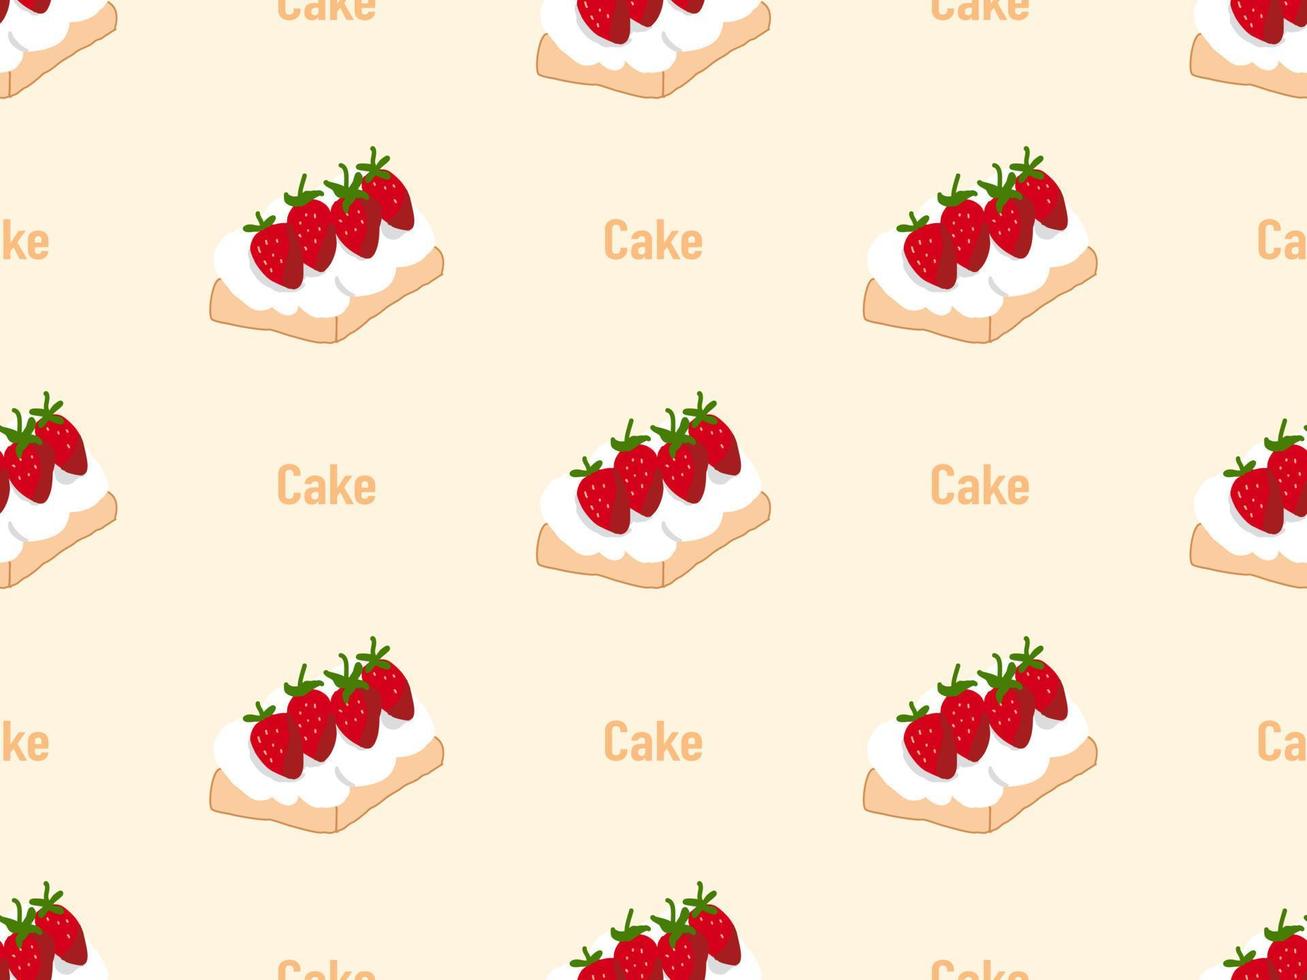 Cake cartoon character seamless pattern on yellow background. vector